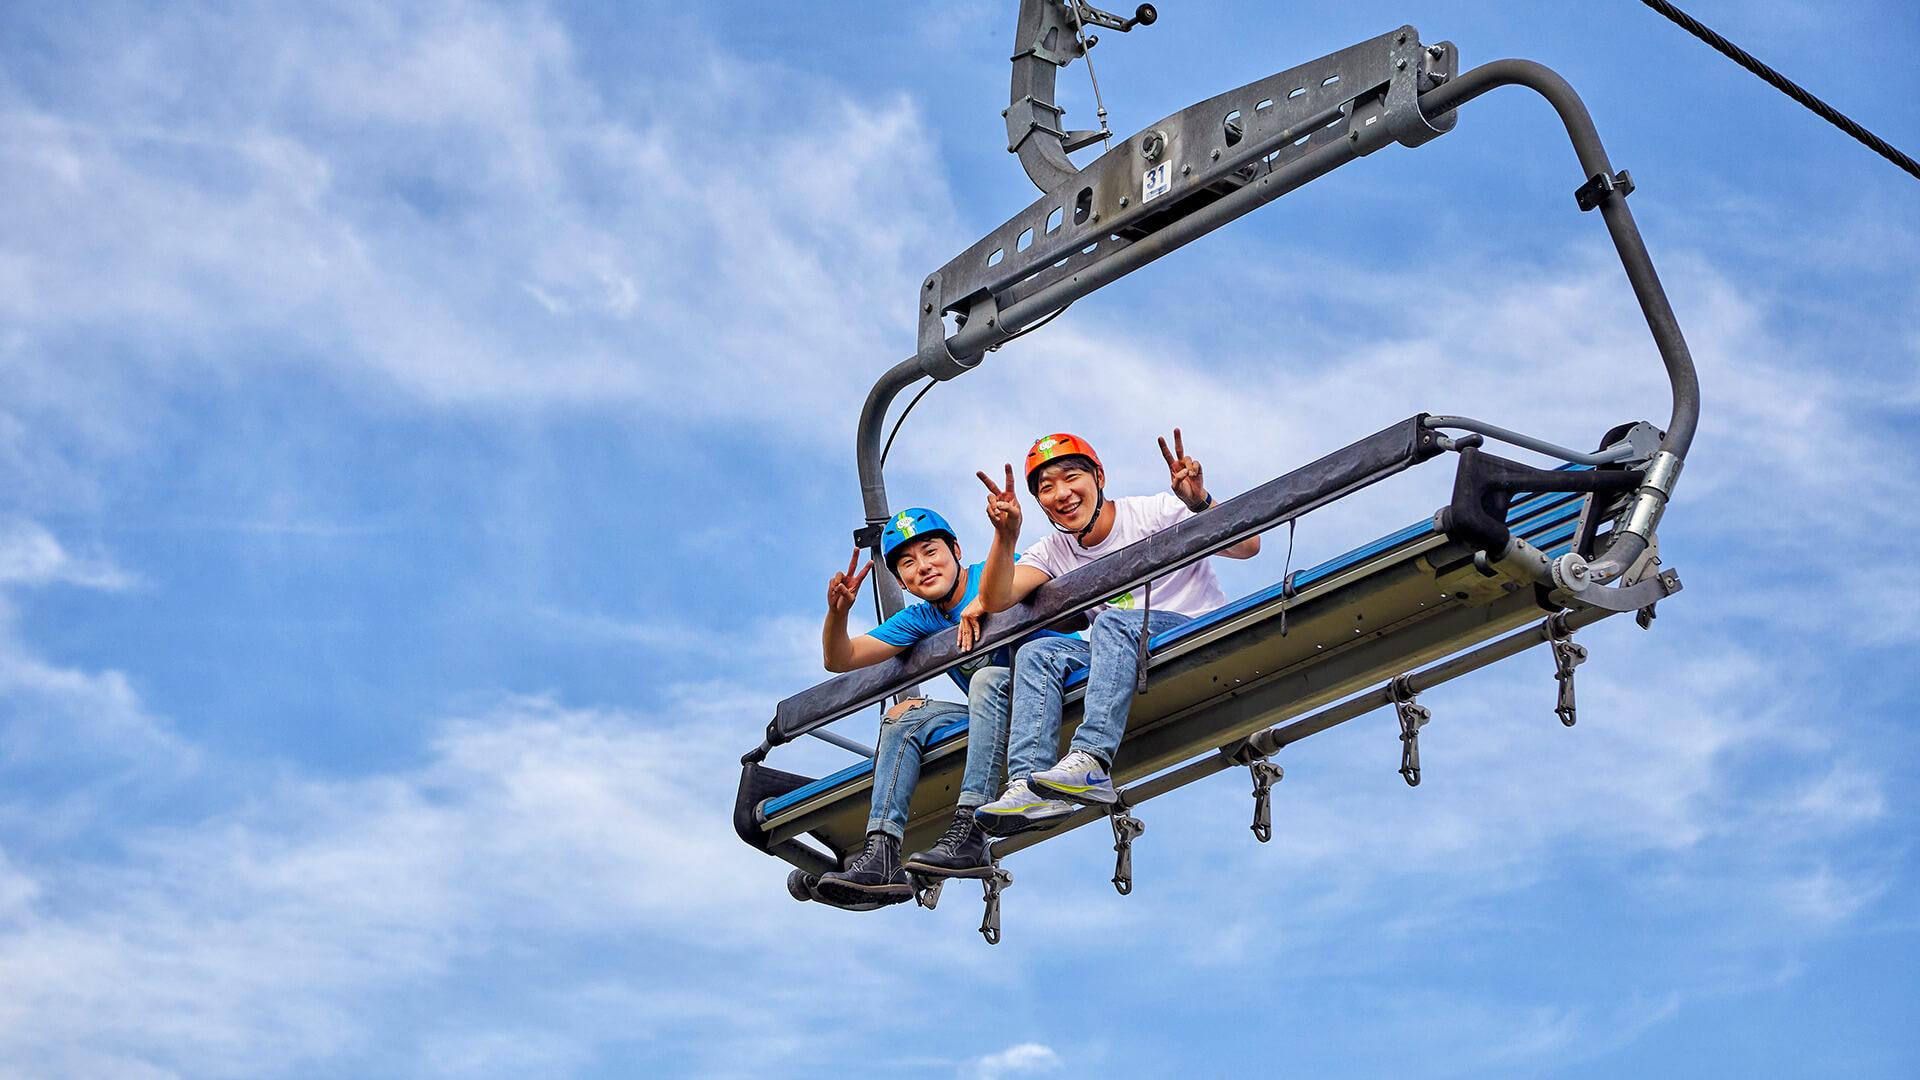 Two friends pull the peace sign whilst riding the Chairlift at Skyline Luge Tongyeong.